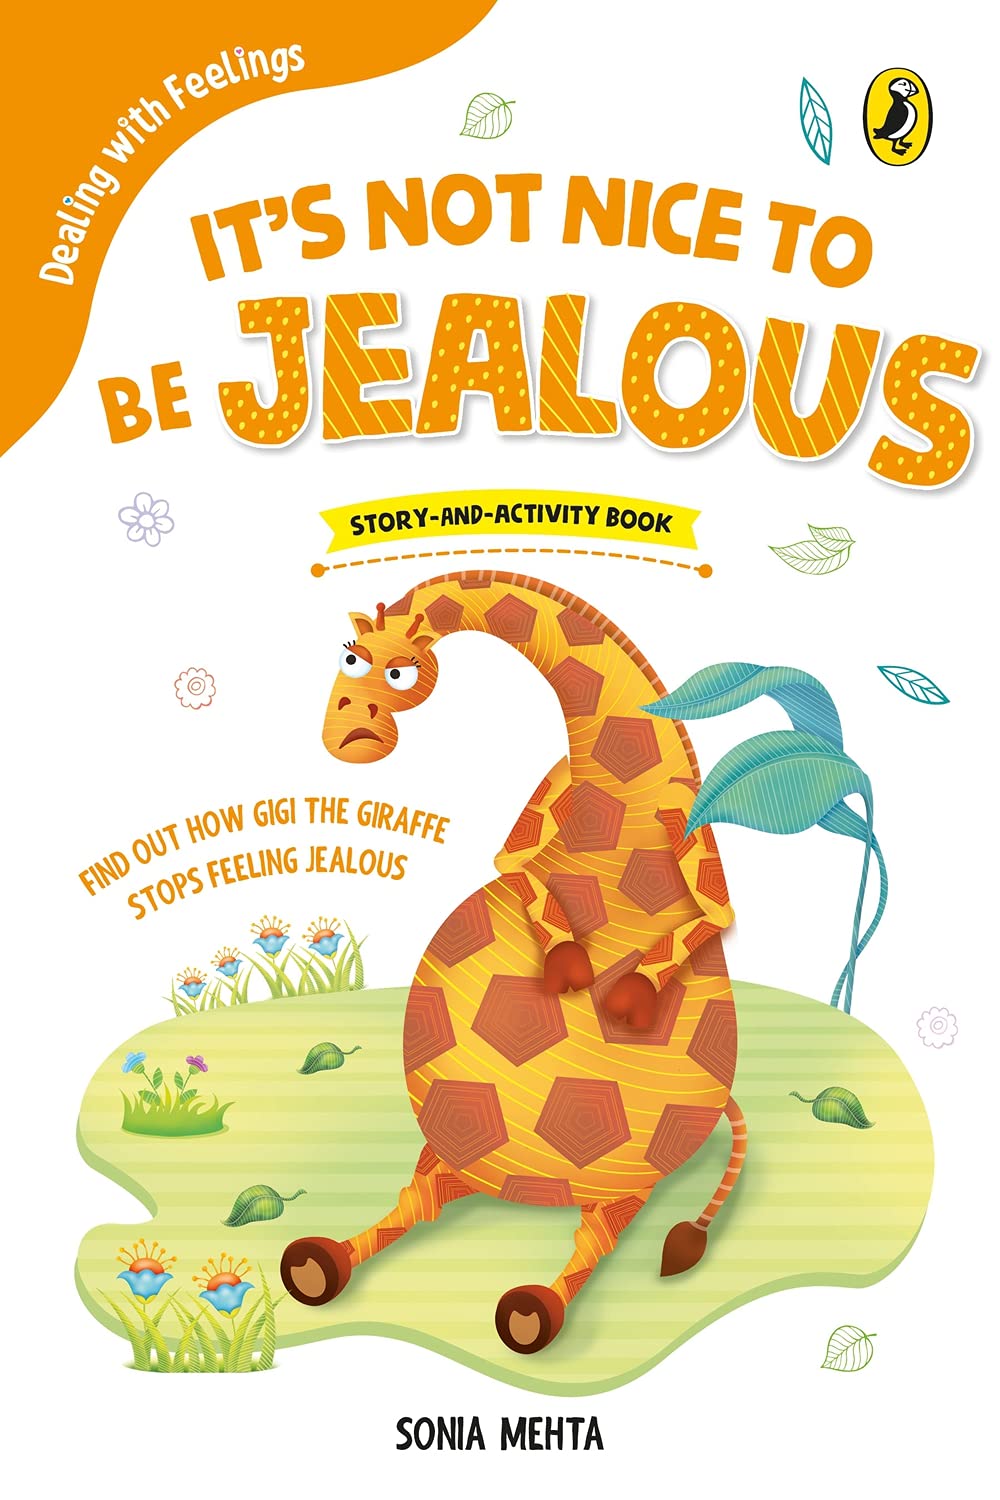 IMG : Dealings with feelings- It's not nice to be Jealous